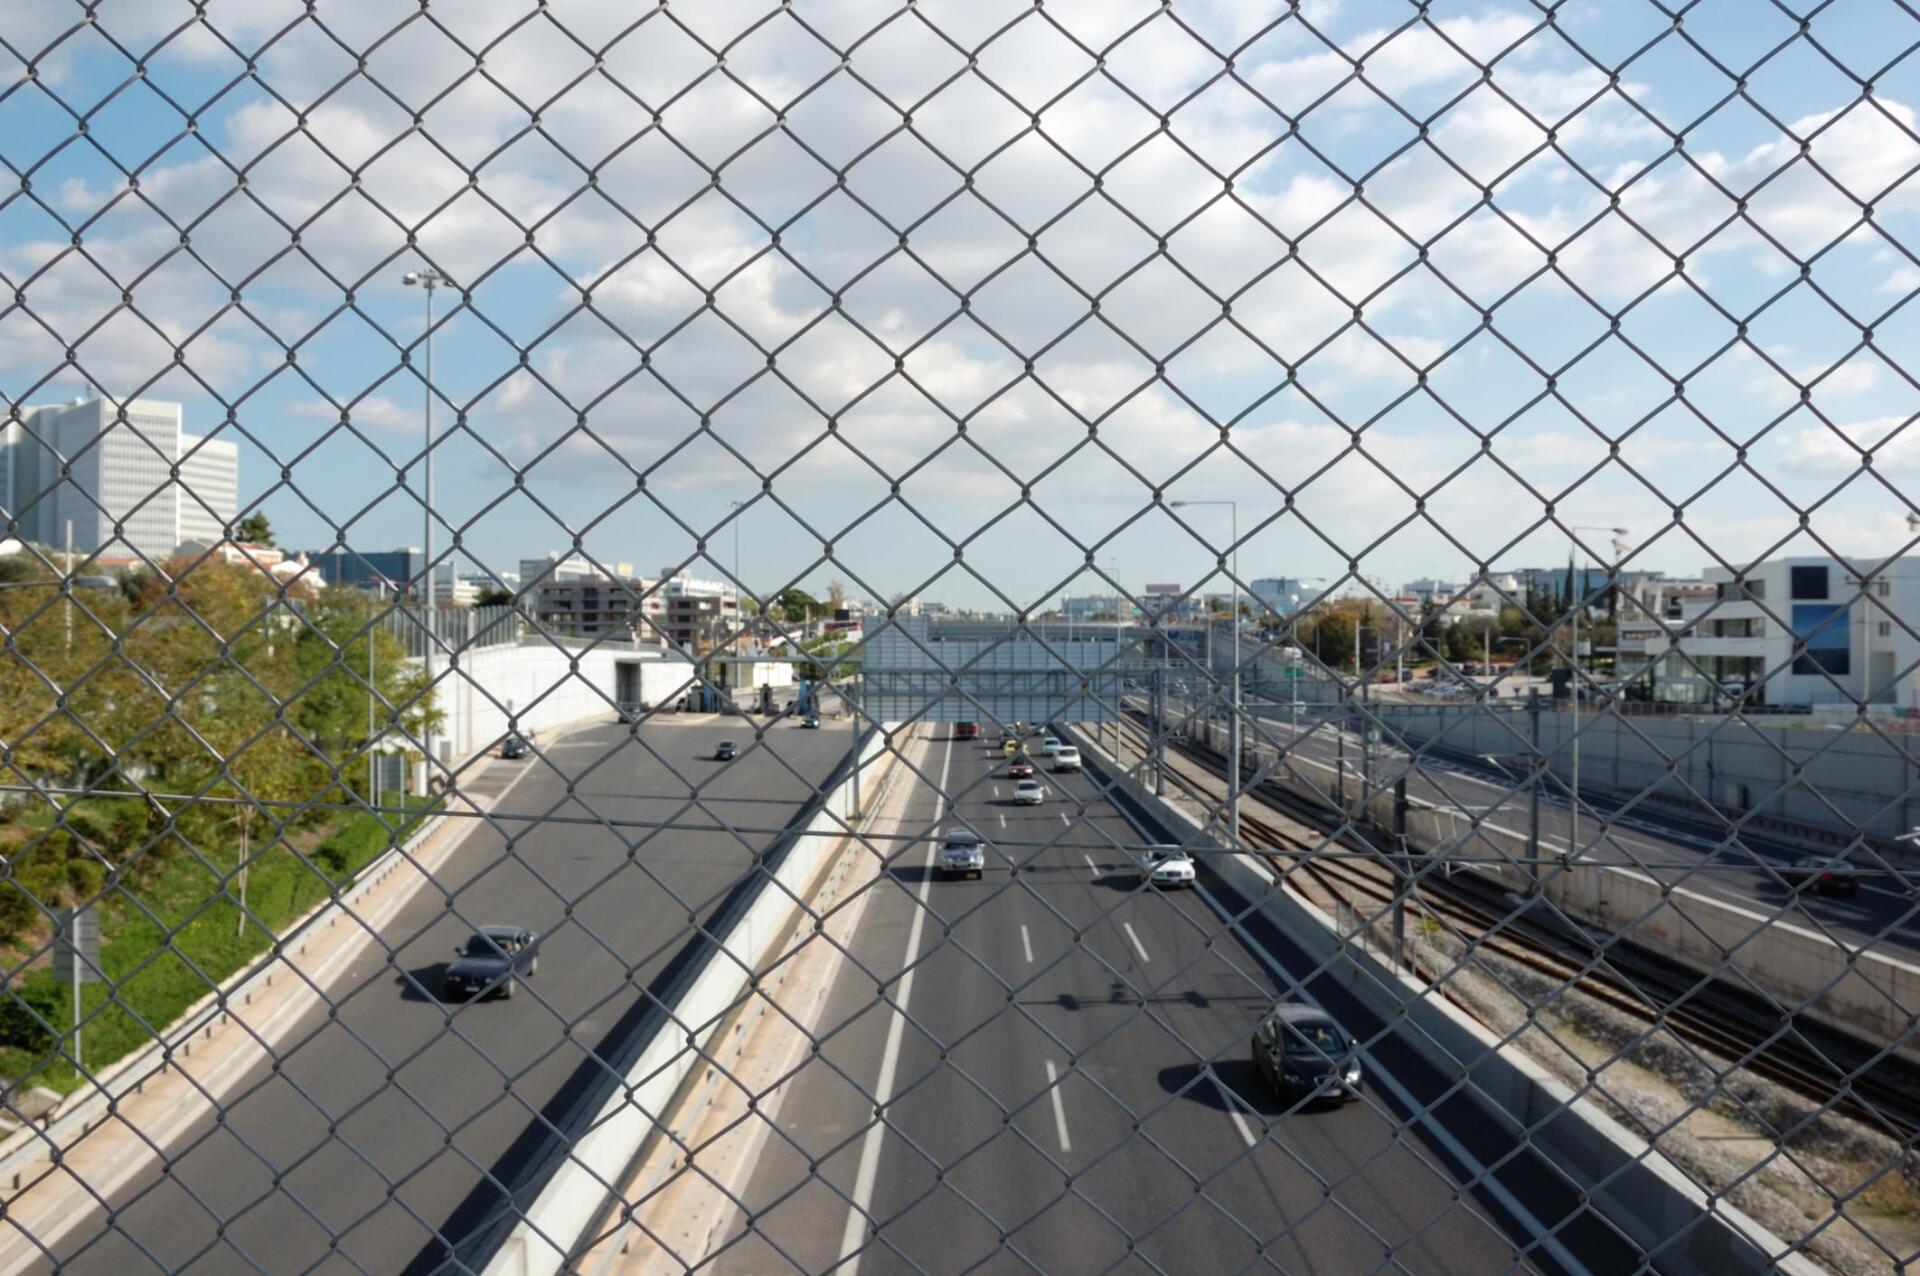 Chain Link fence installed on a pedestrian bridge over an interstate.